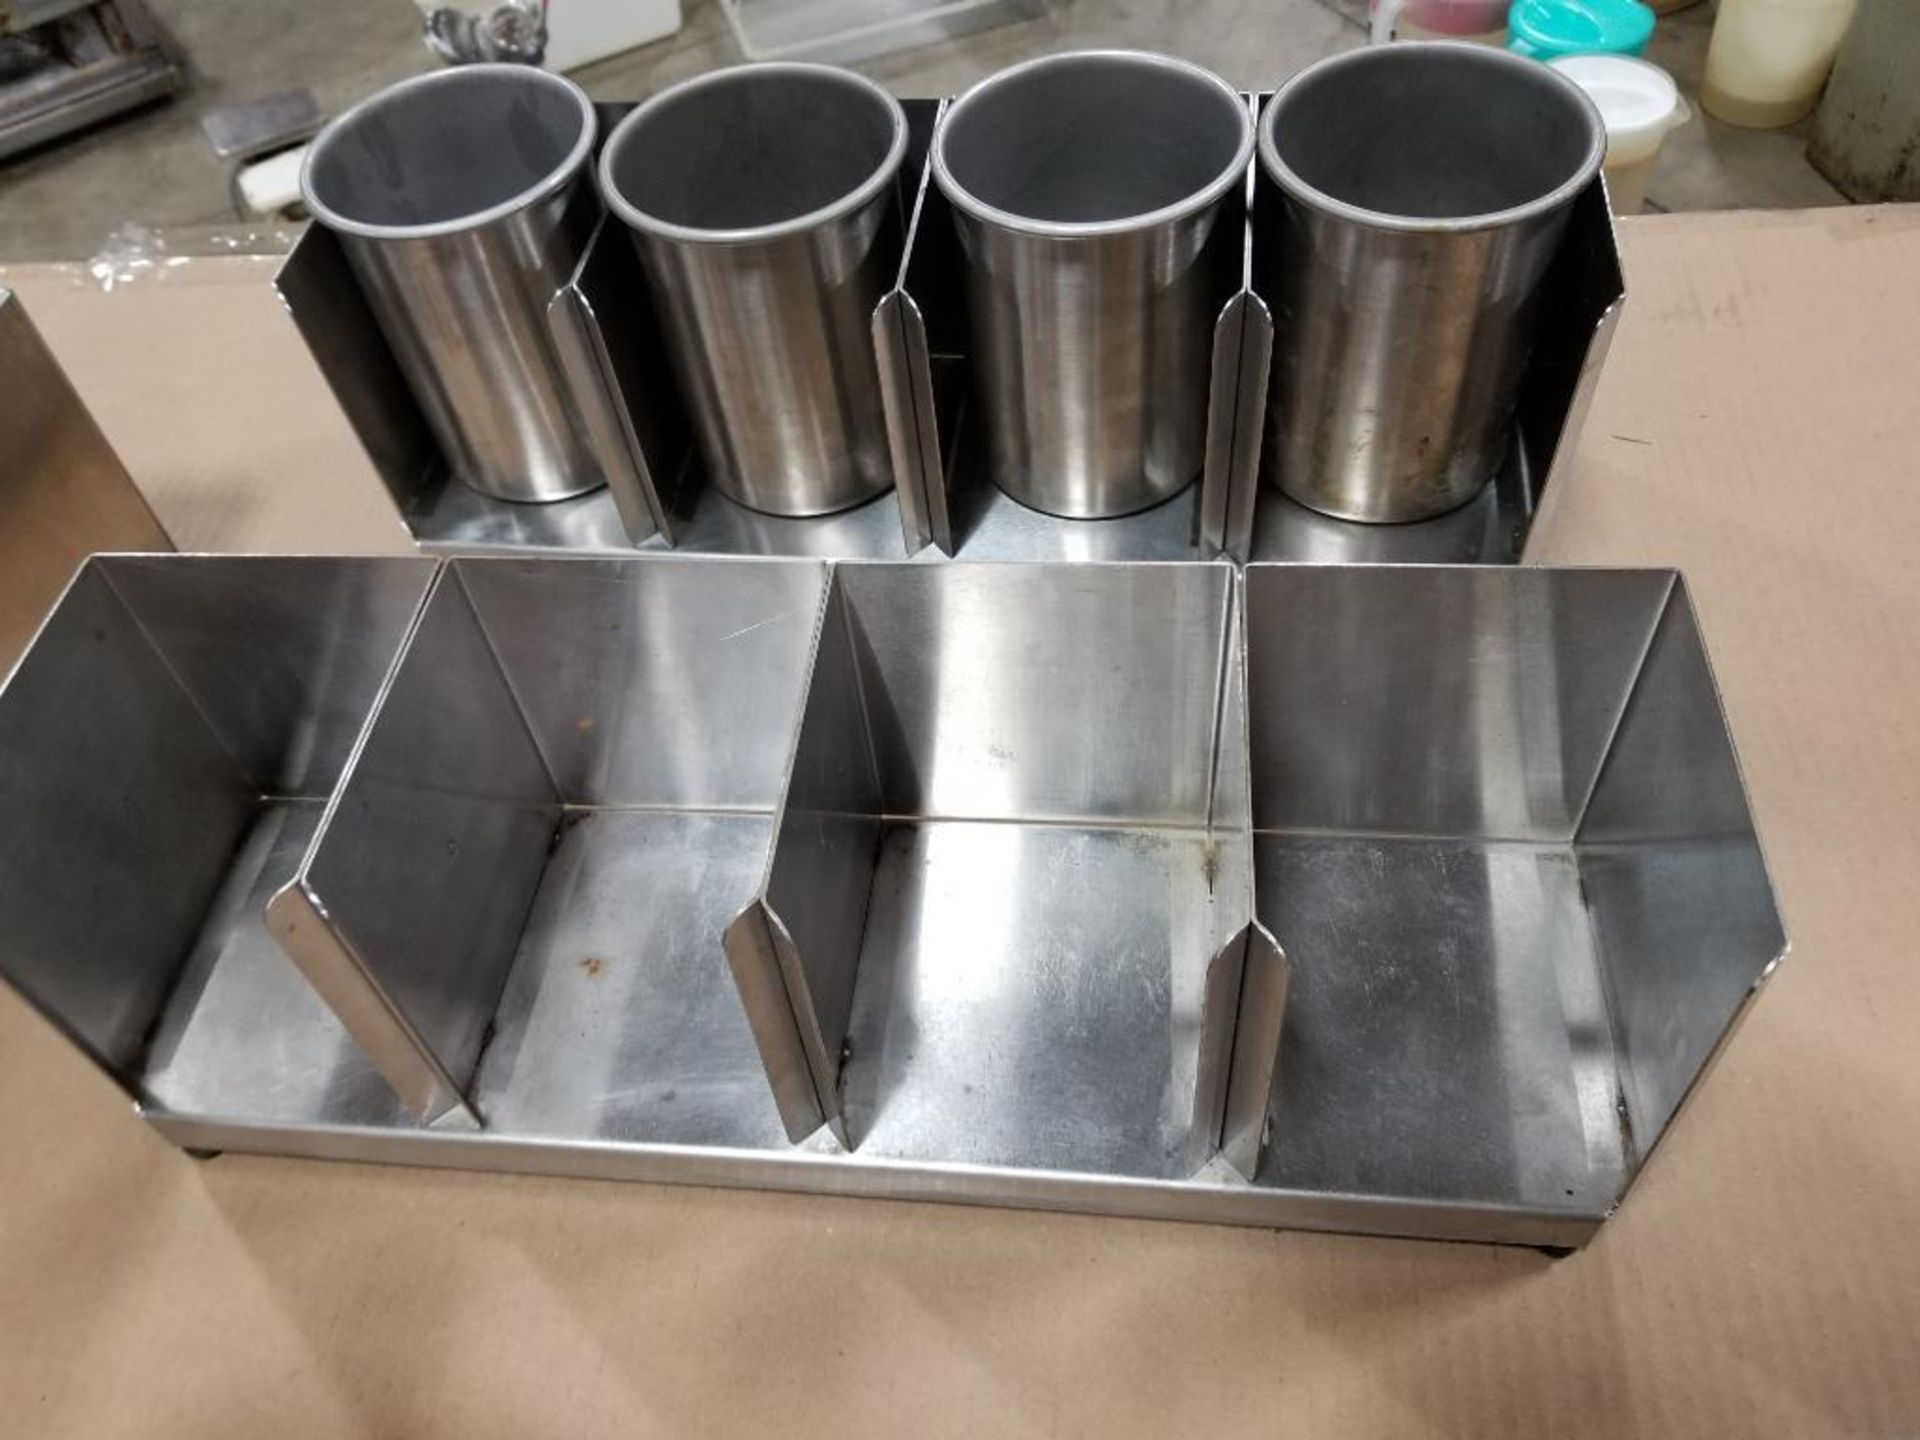 Stainless steel steam table and containers. - Image 15 of 16